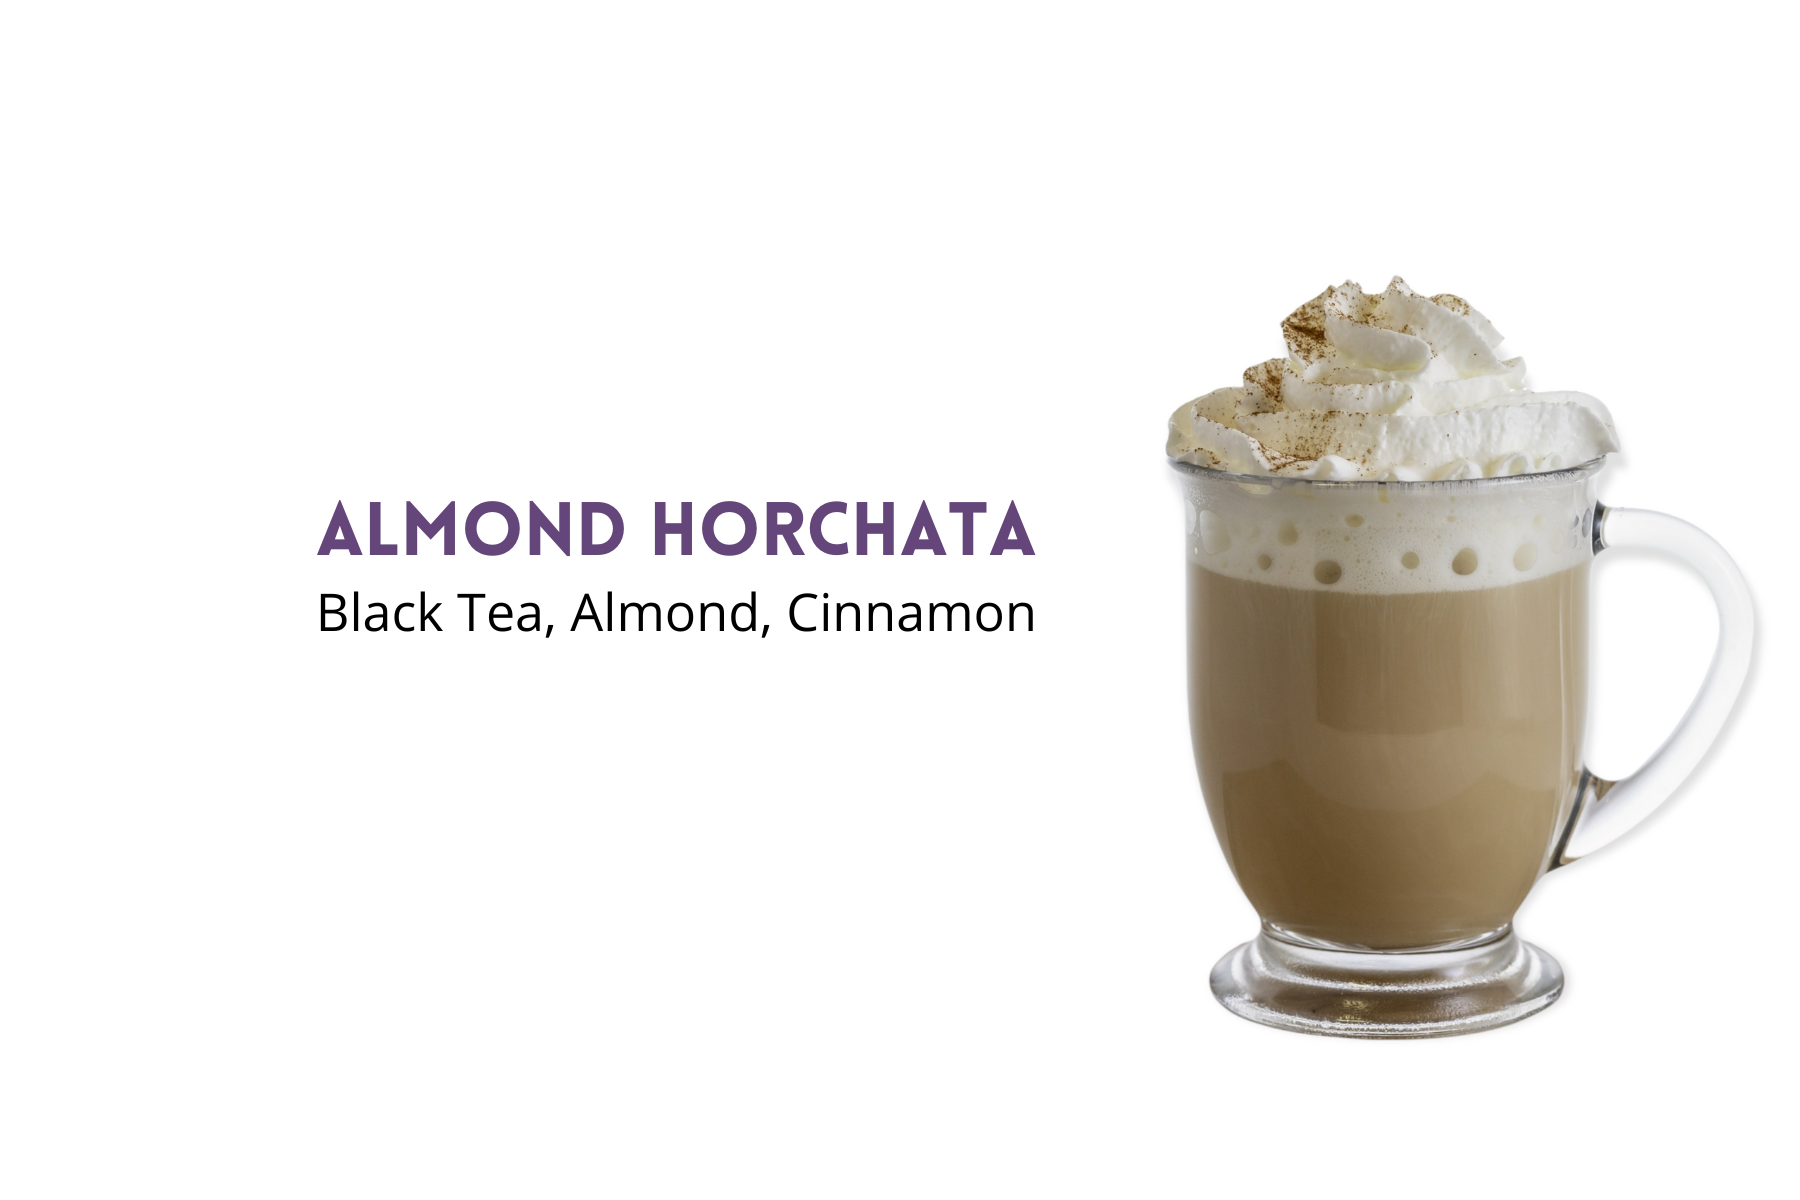 How to Make an Almond Horchata